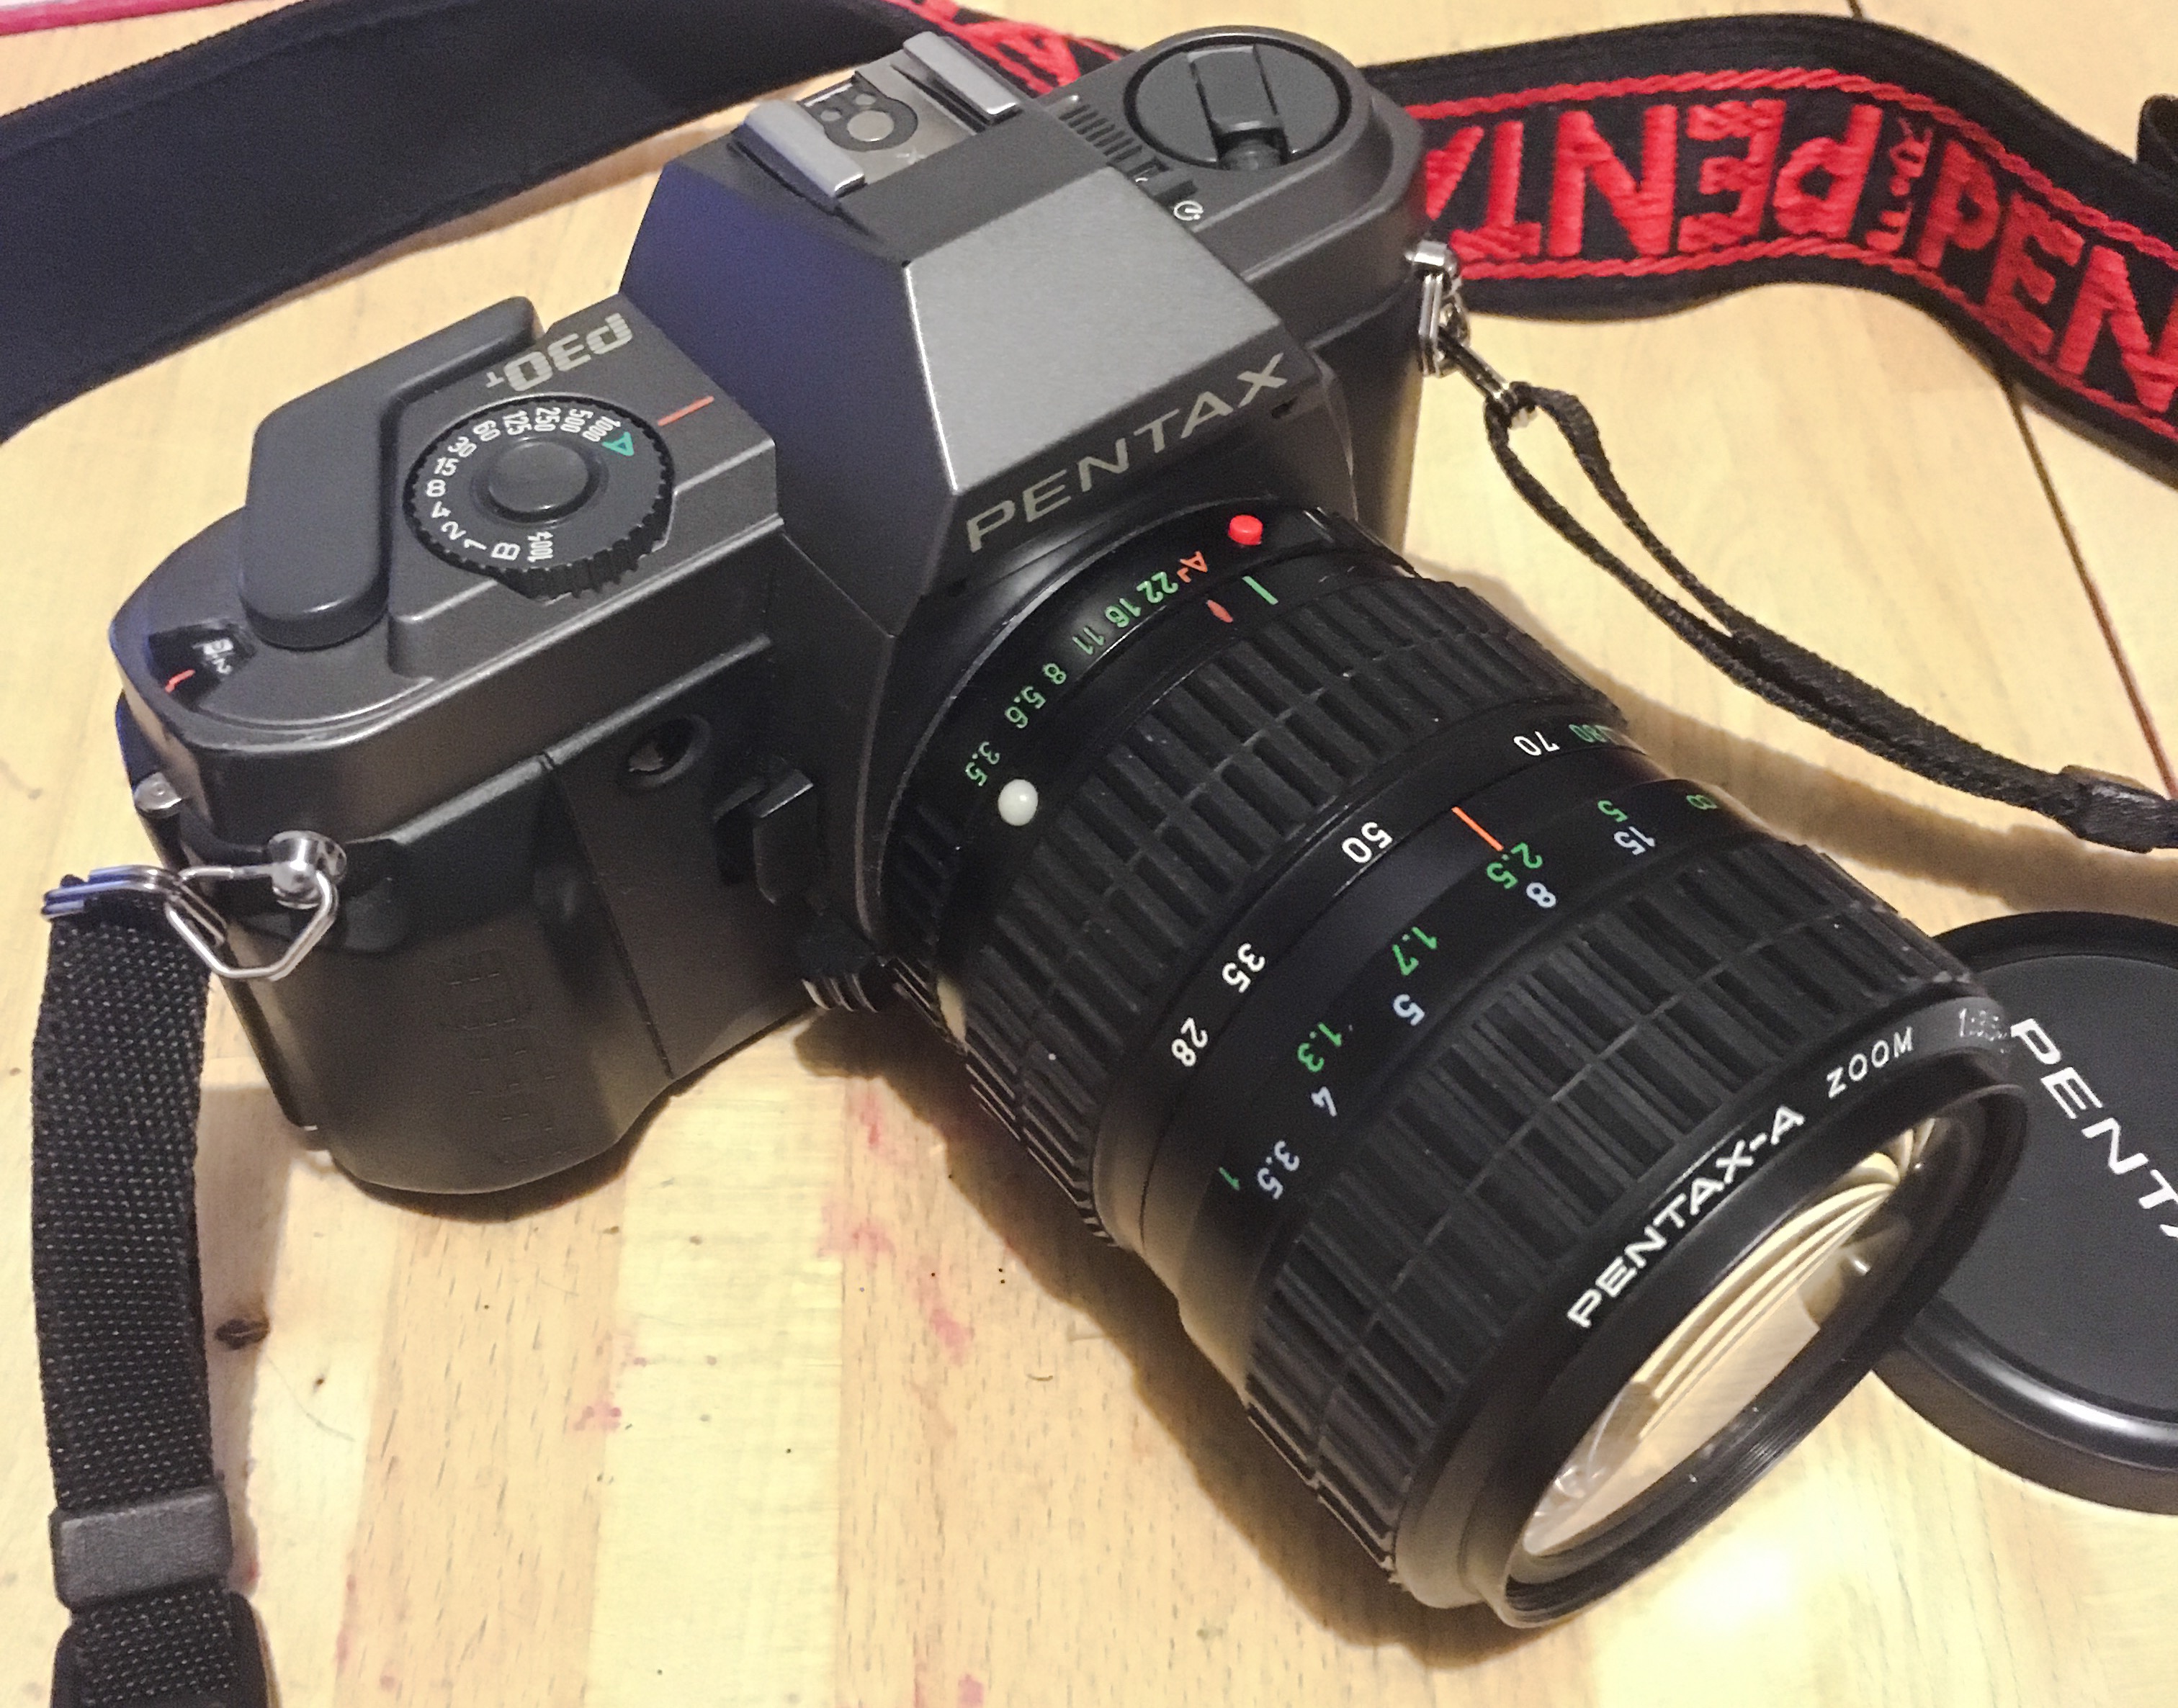 Pentax P30T with Pentax K-A 28-80mm zoom lens